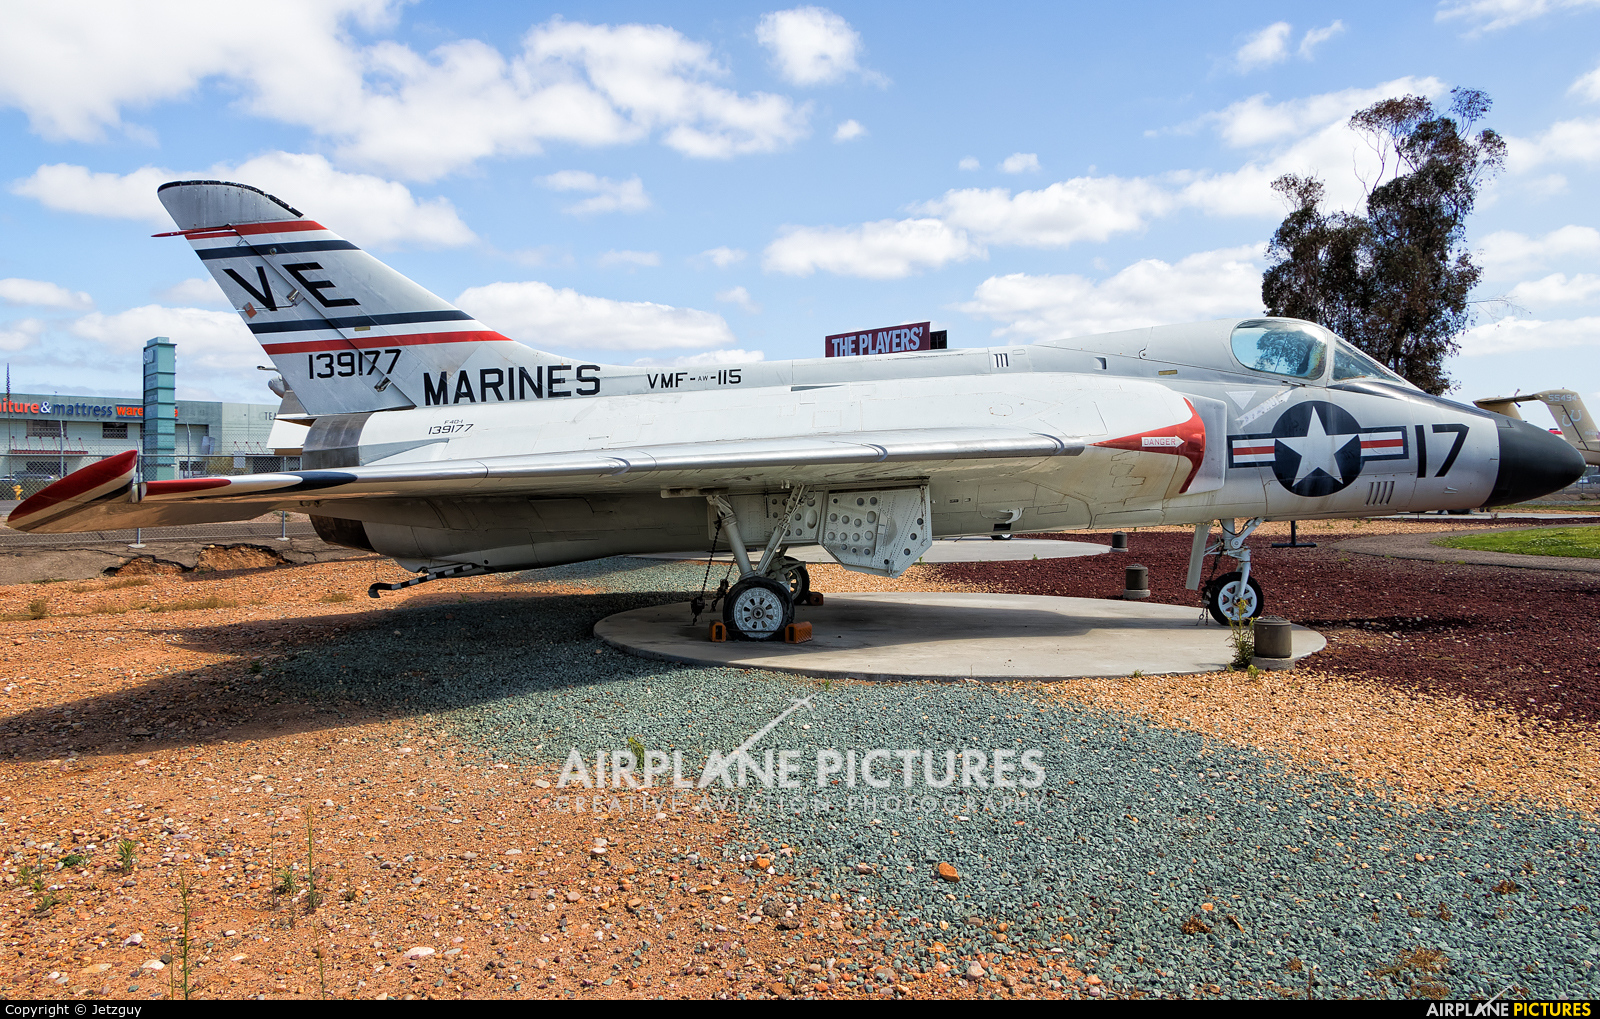 USA - Marine Corps 139177 aircraft at Miramar MCAS - Flying Leatherneck Aviation Museum